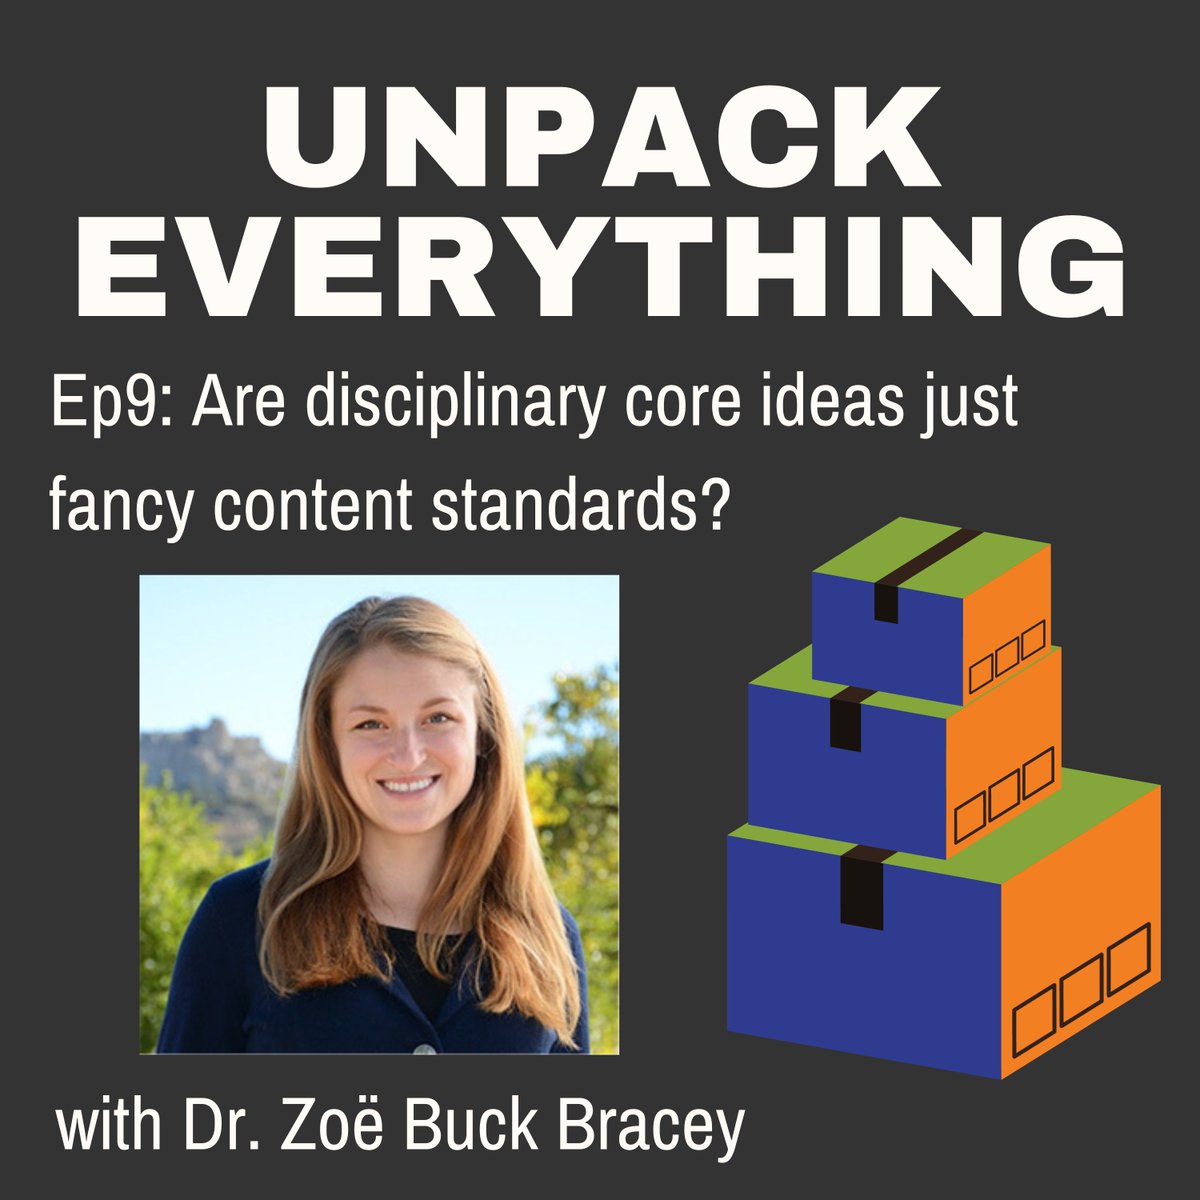 This week's podcast 🎁 comes one day early as @ZoeBuckBracey talks us through what makes disciplinary core ideas special! open.spotify.com/episode/1Hfsqg…